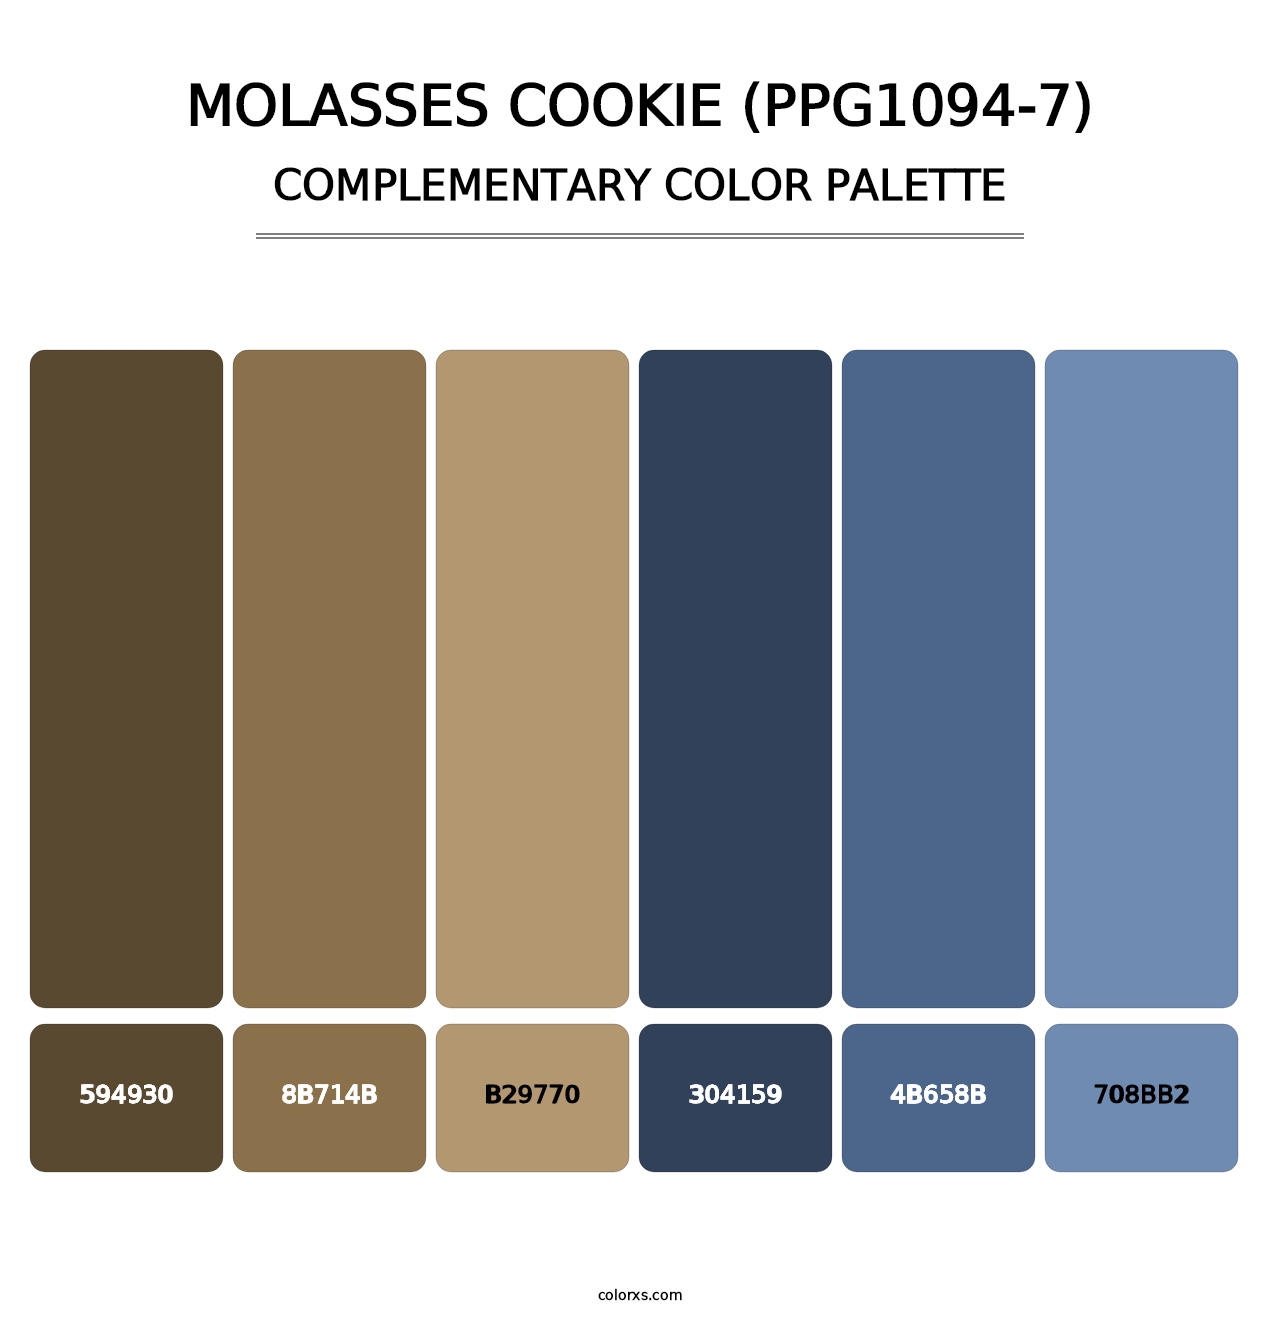 Molasses Cookie (PPG1094-7) - Complementary Color Palette